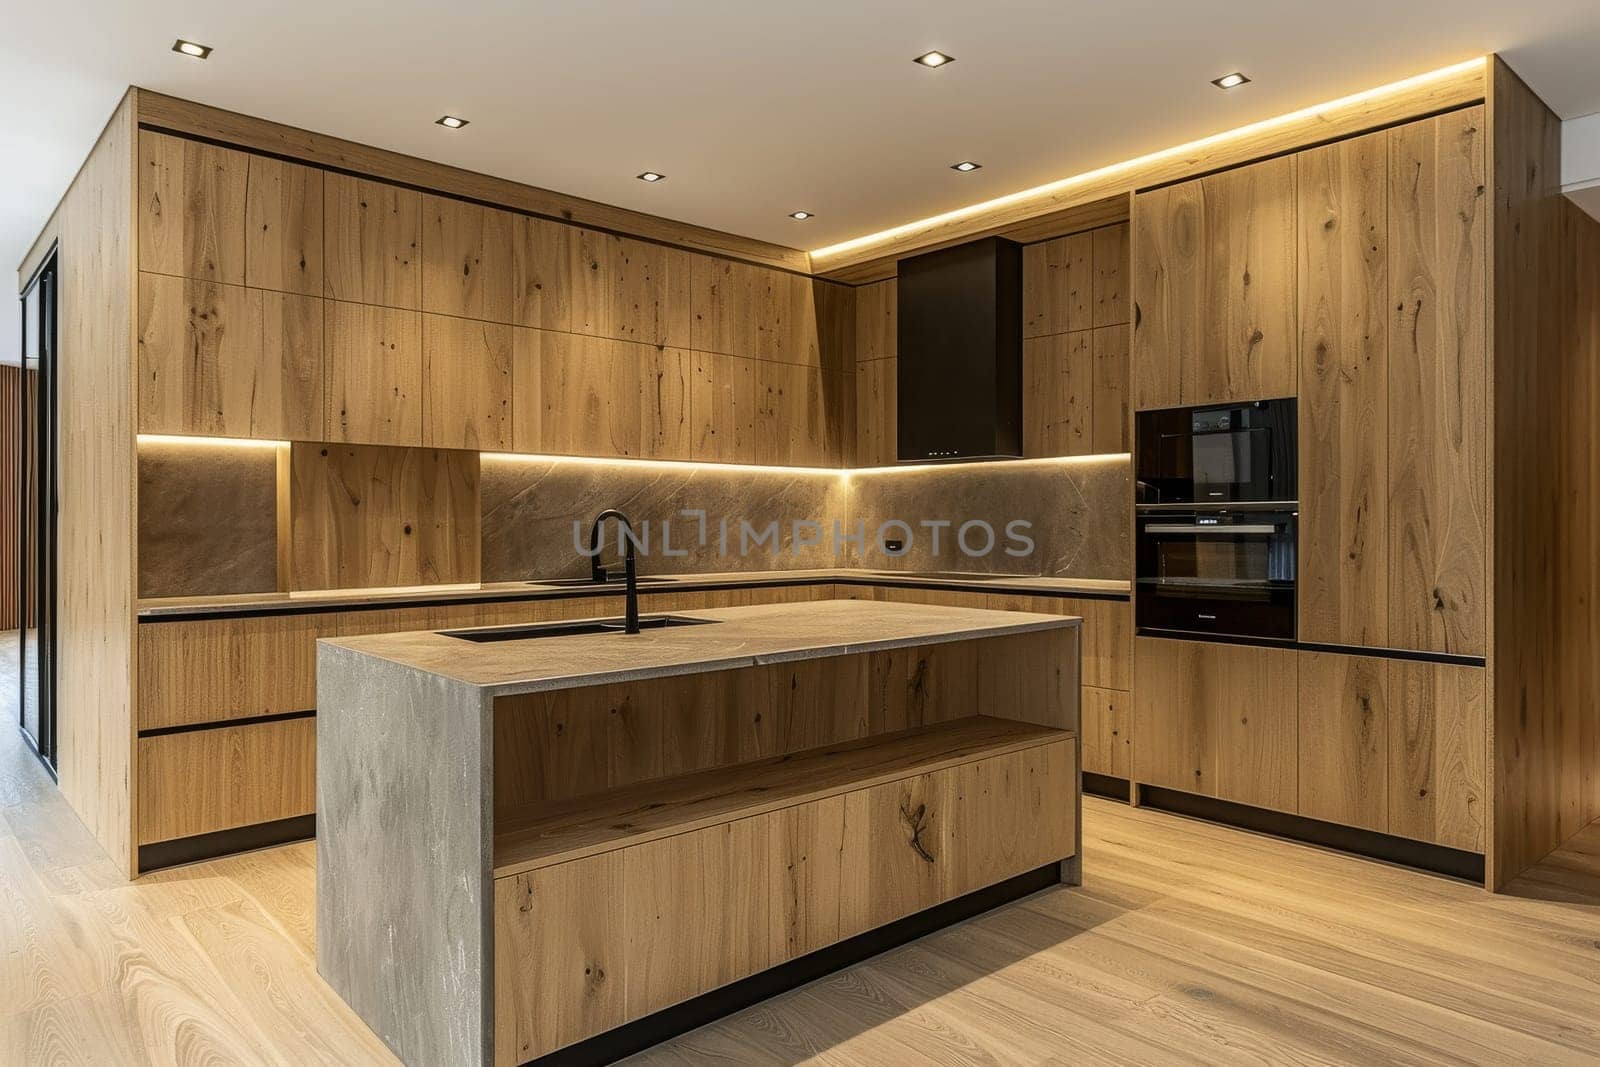 A kitchen with a granite countertop and wood cabinets. The kitchen is clean and well-organized